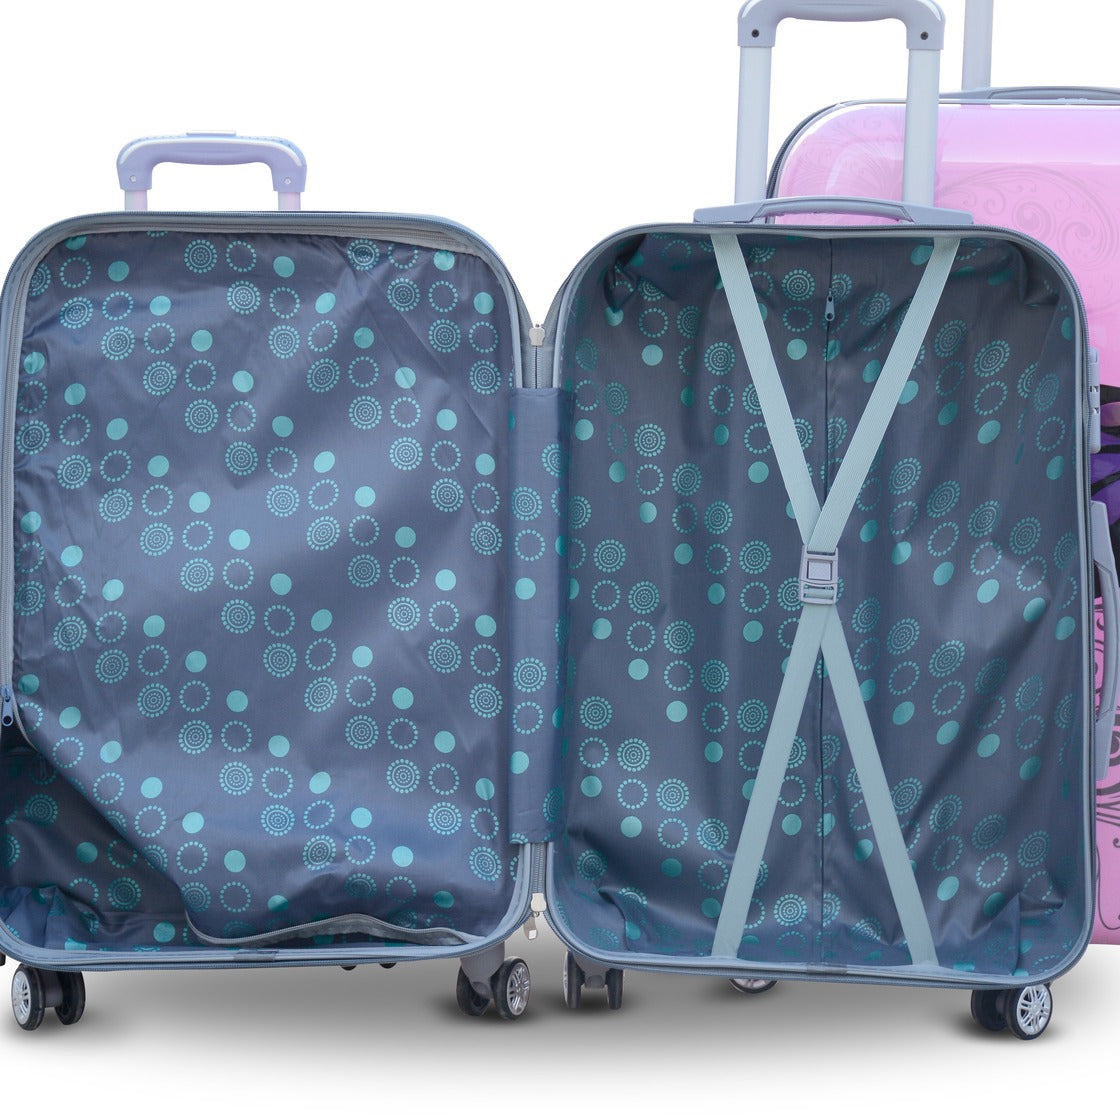 28" Pink Colour Printed Butterfly ABS Luggage Lightweight Hard Case Trolley Bag Zaappy.com